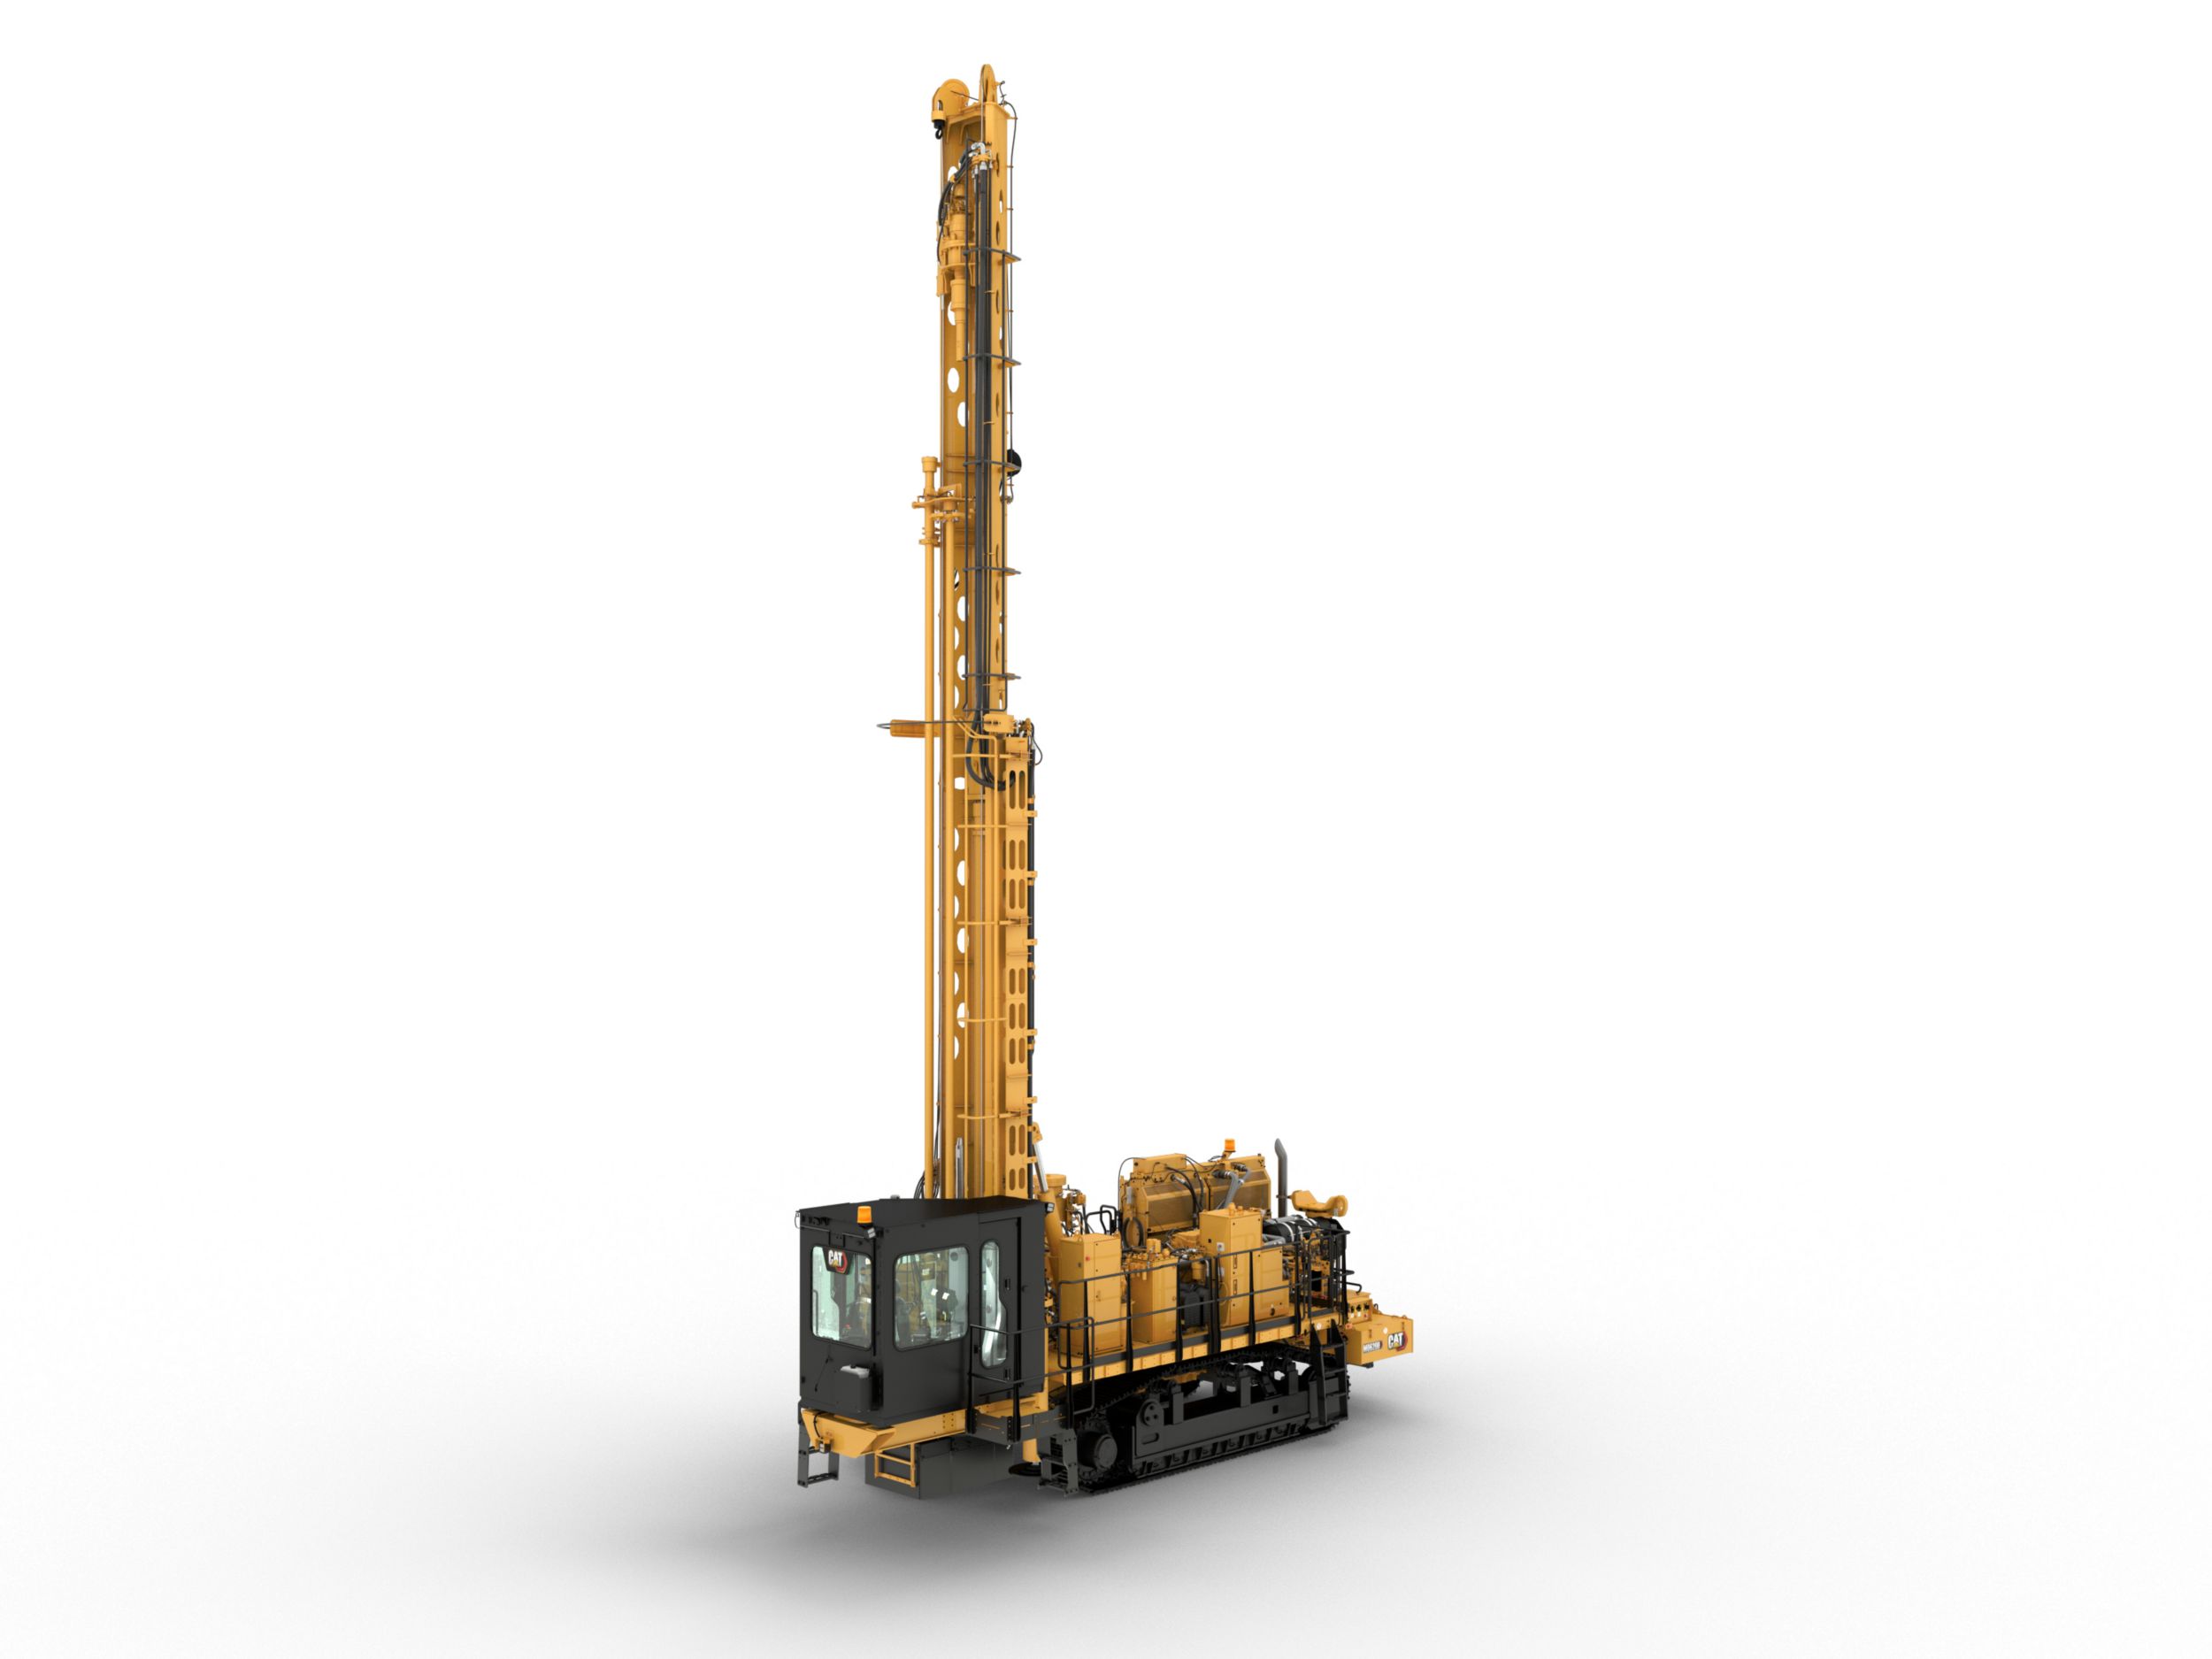 MD6200 Rotary Blasthole Drill Specifications